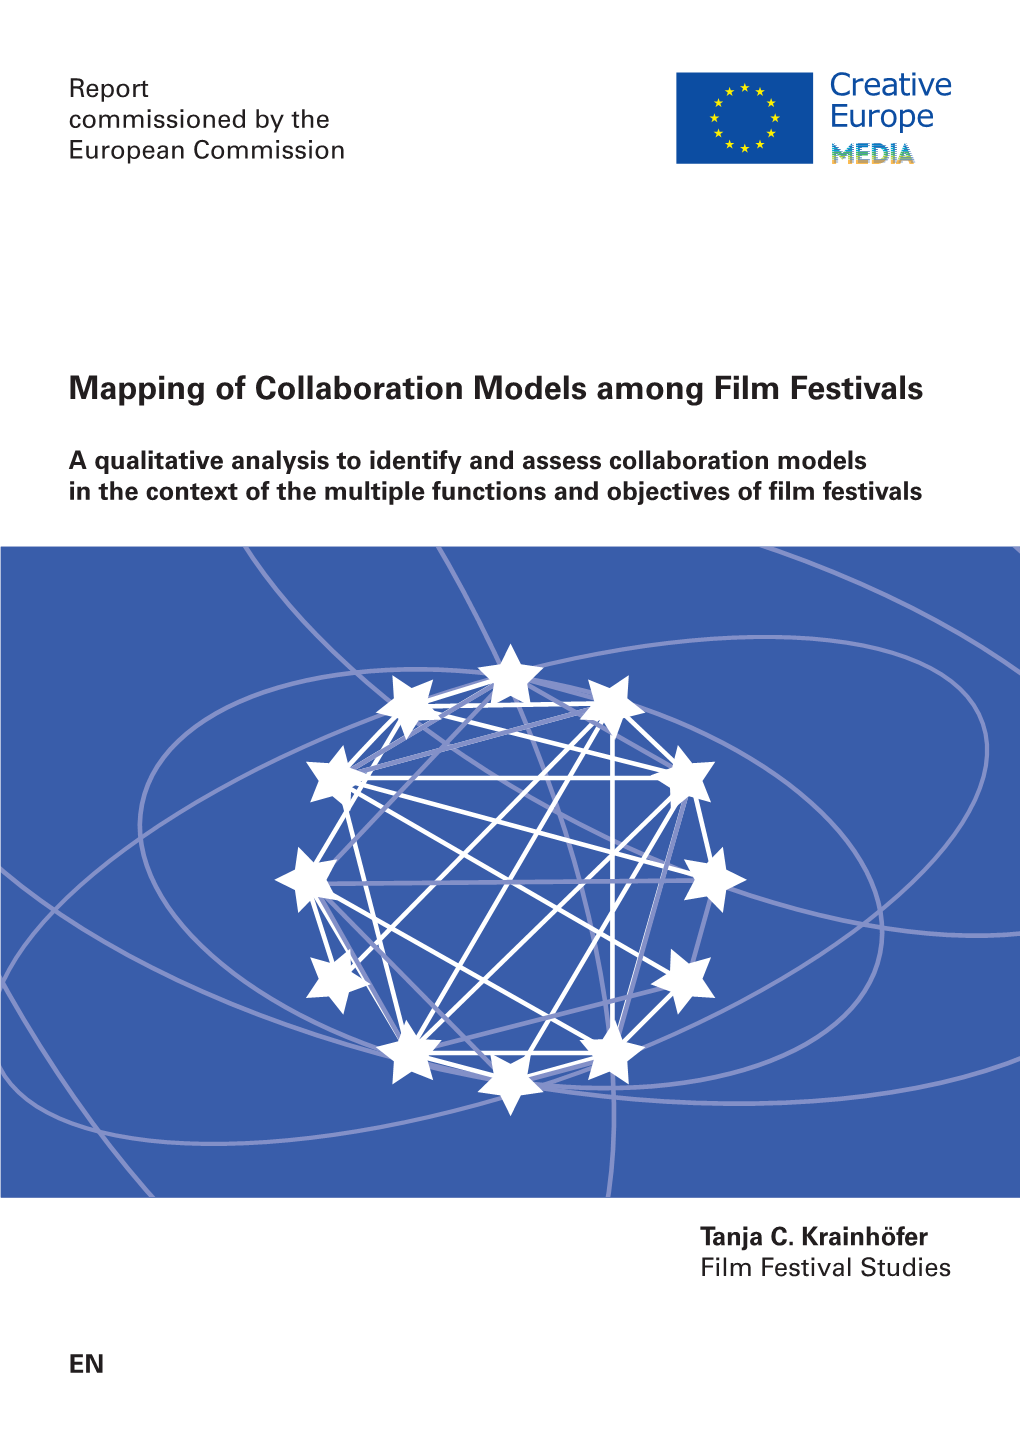 Report Mapping of Collaboration Models Among Film Festivals